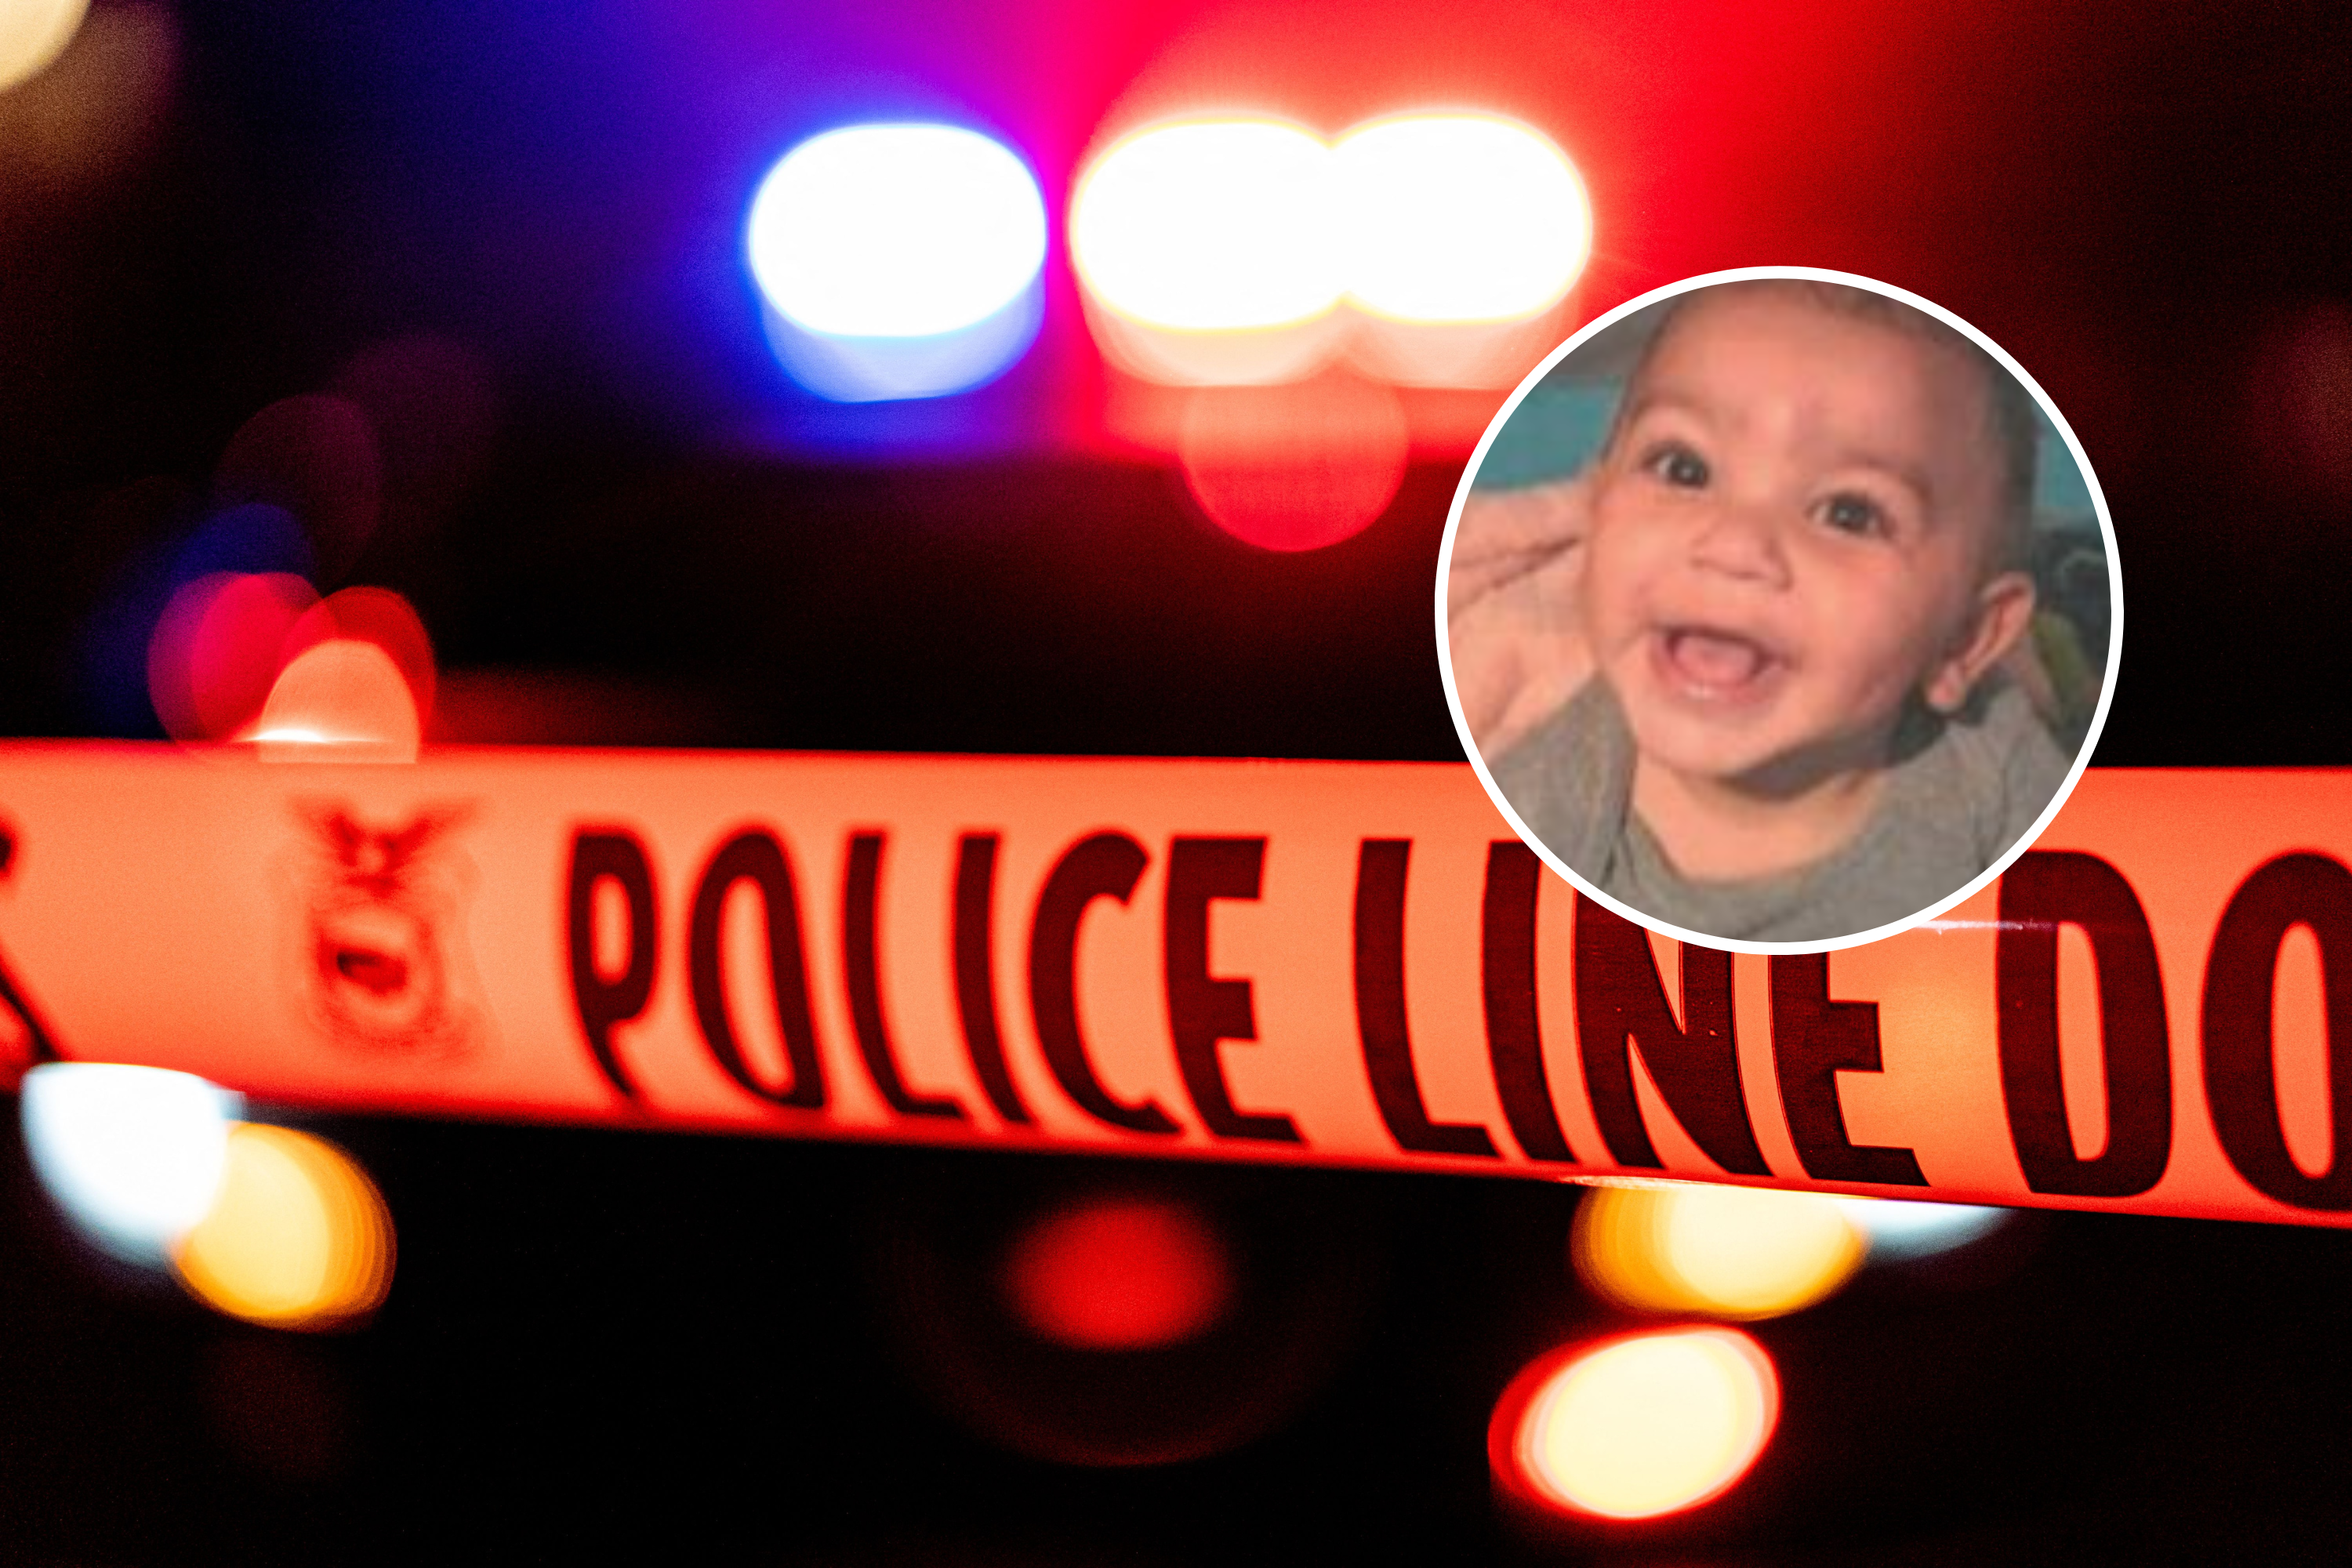 Amber Alert as 10-Month-Old Child in 'Extreme Danger'